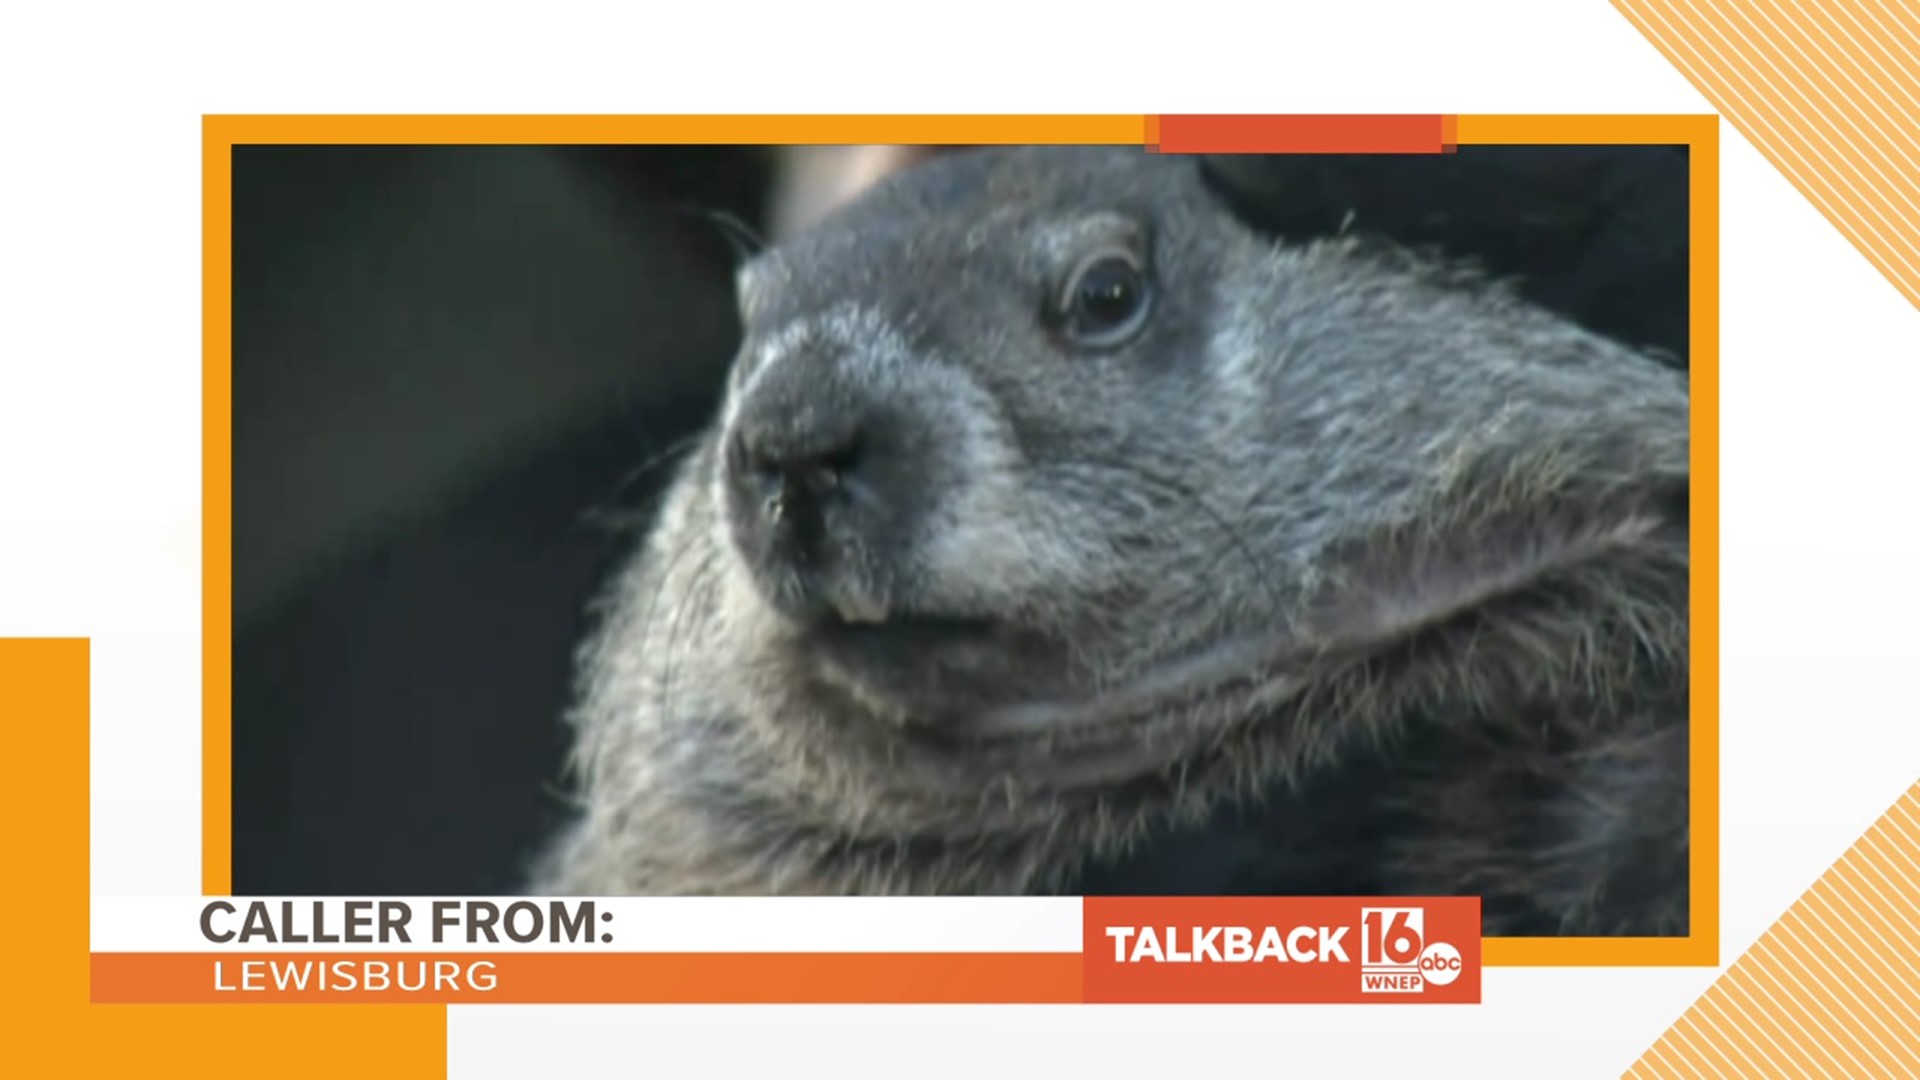 It's Groundhog Day, you know what that means: calls about Punxsutawney Phil.